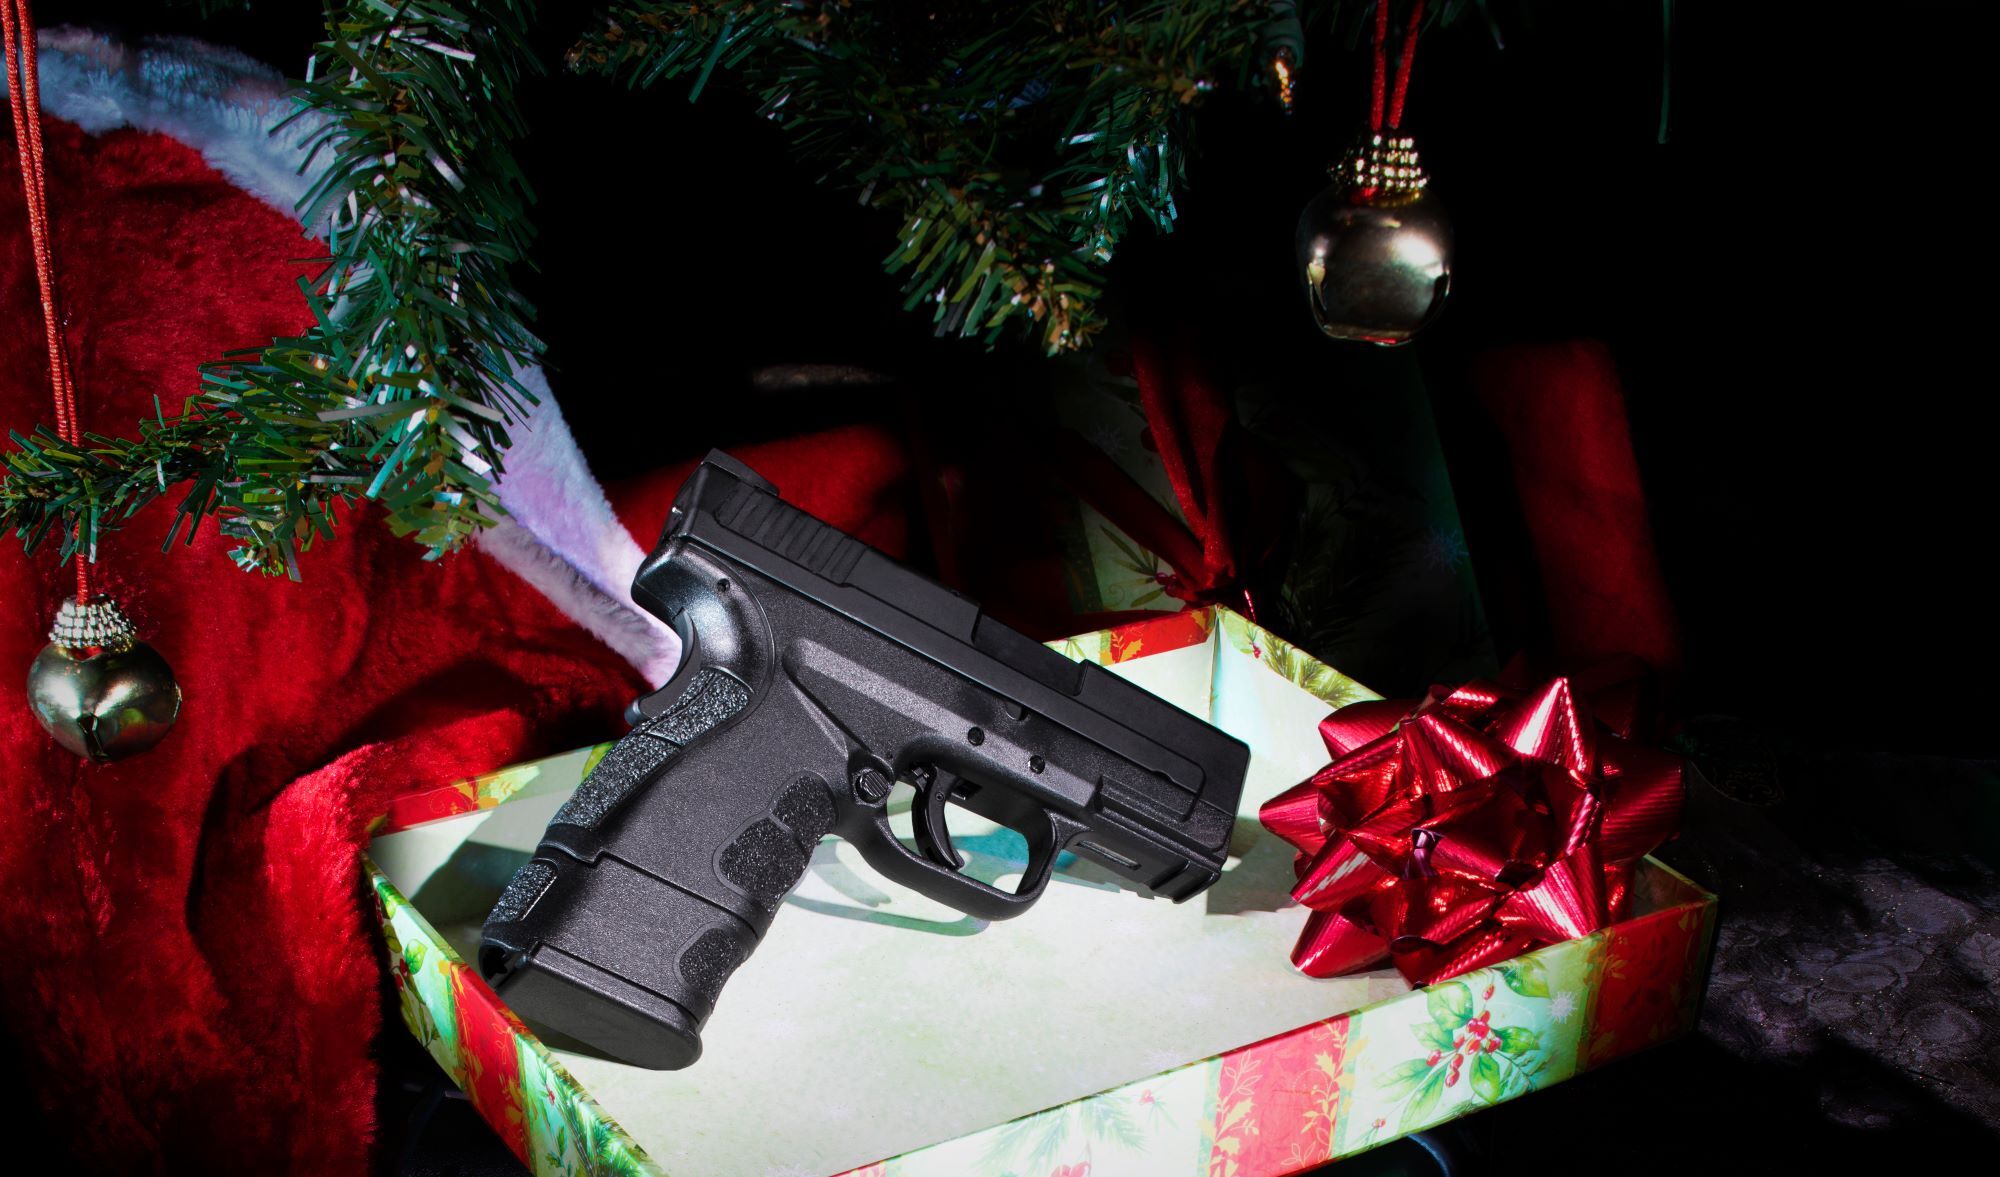 Merry Christmas from Wyoming Gun Owners!